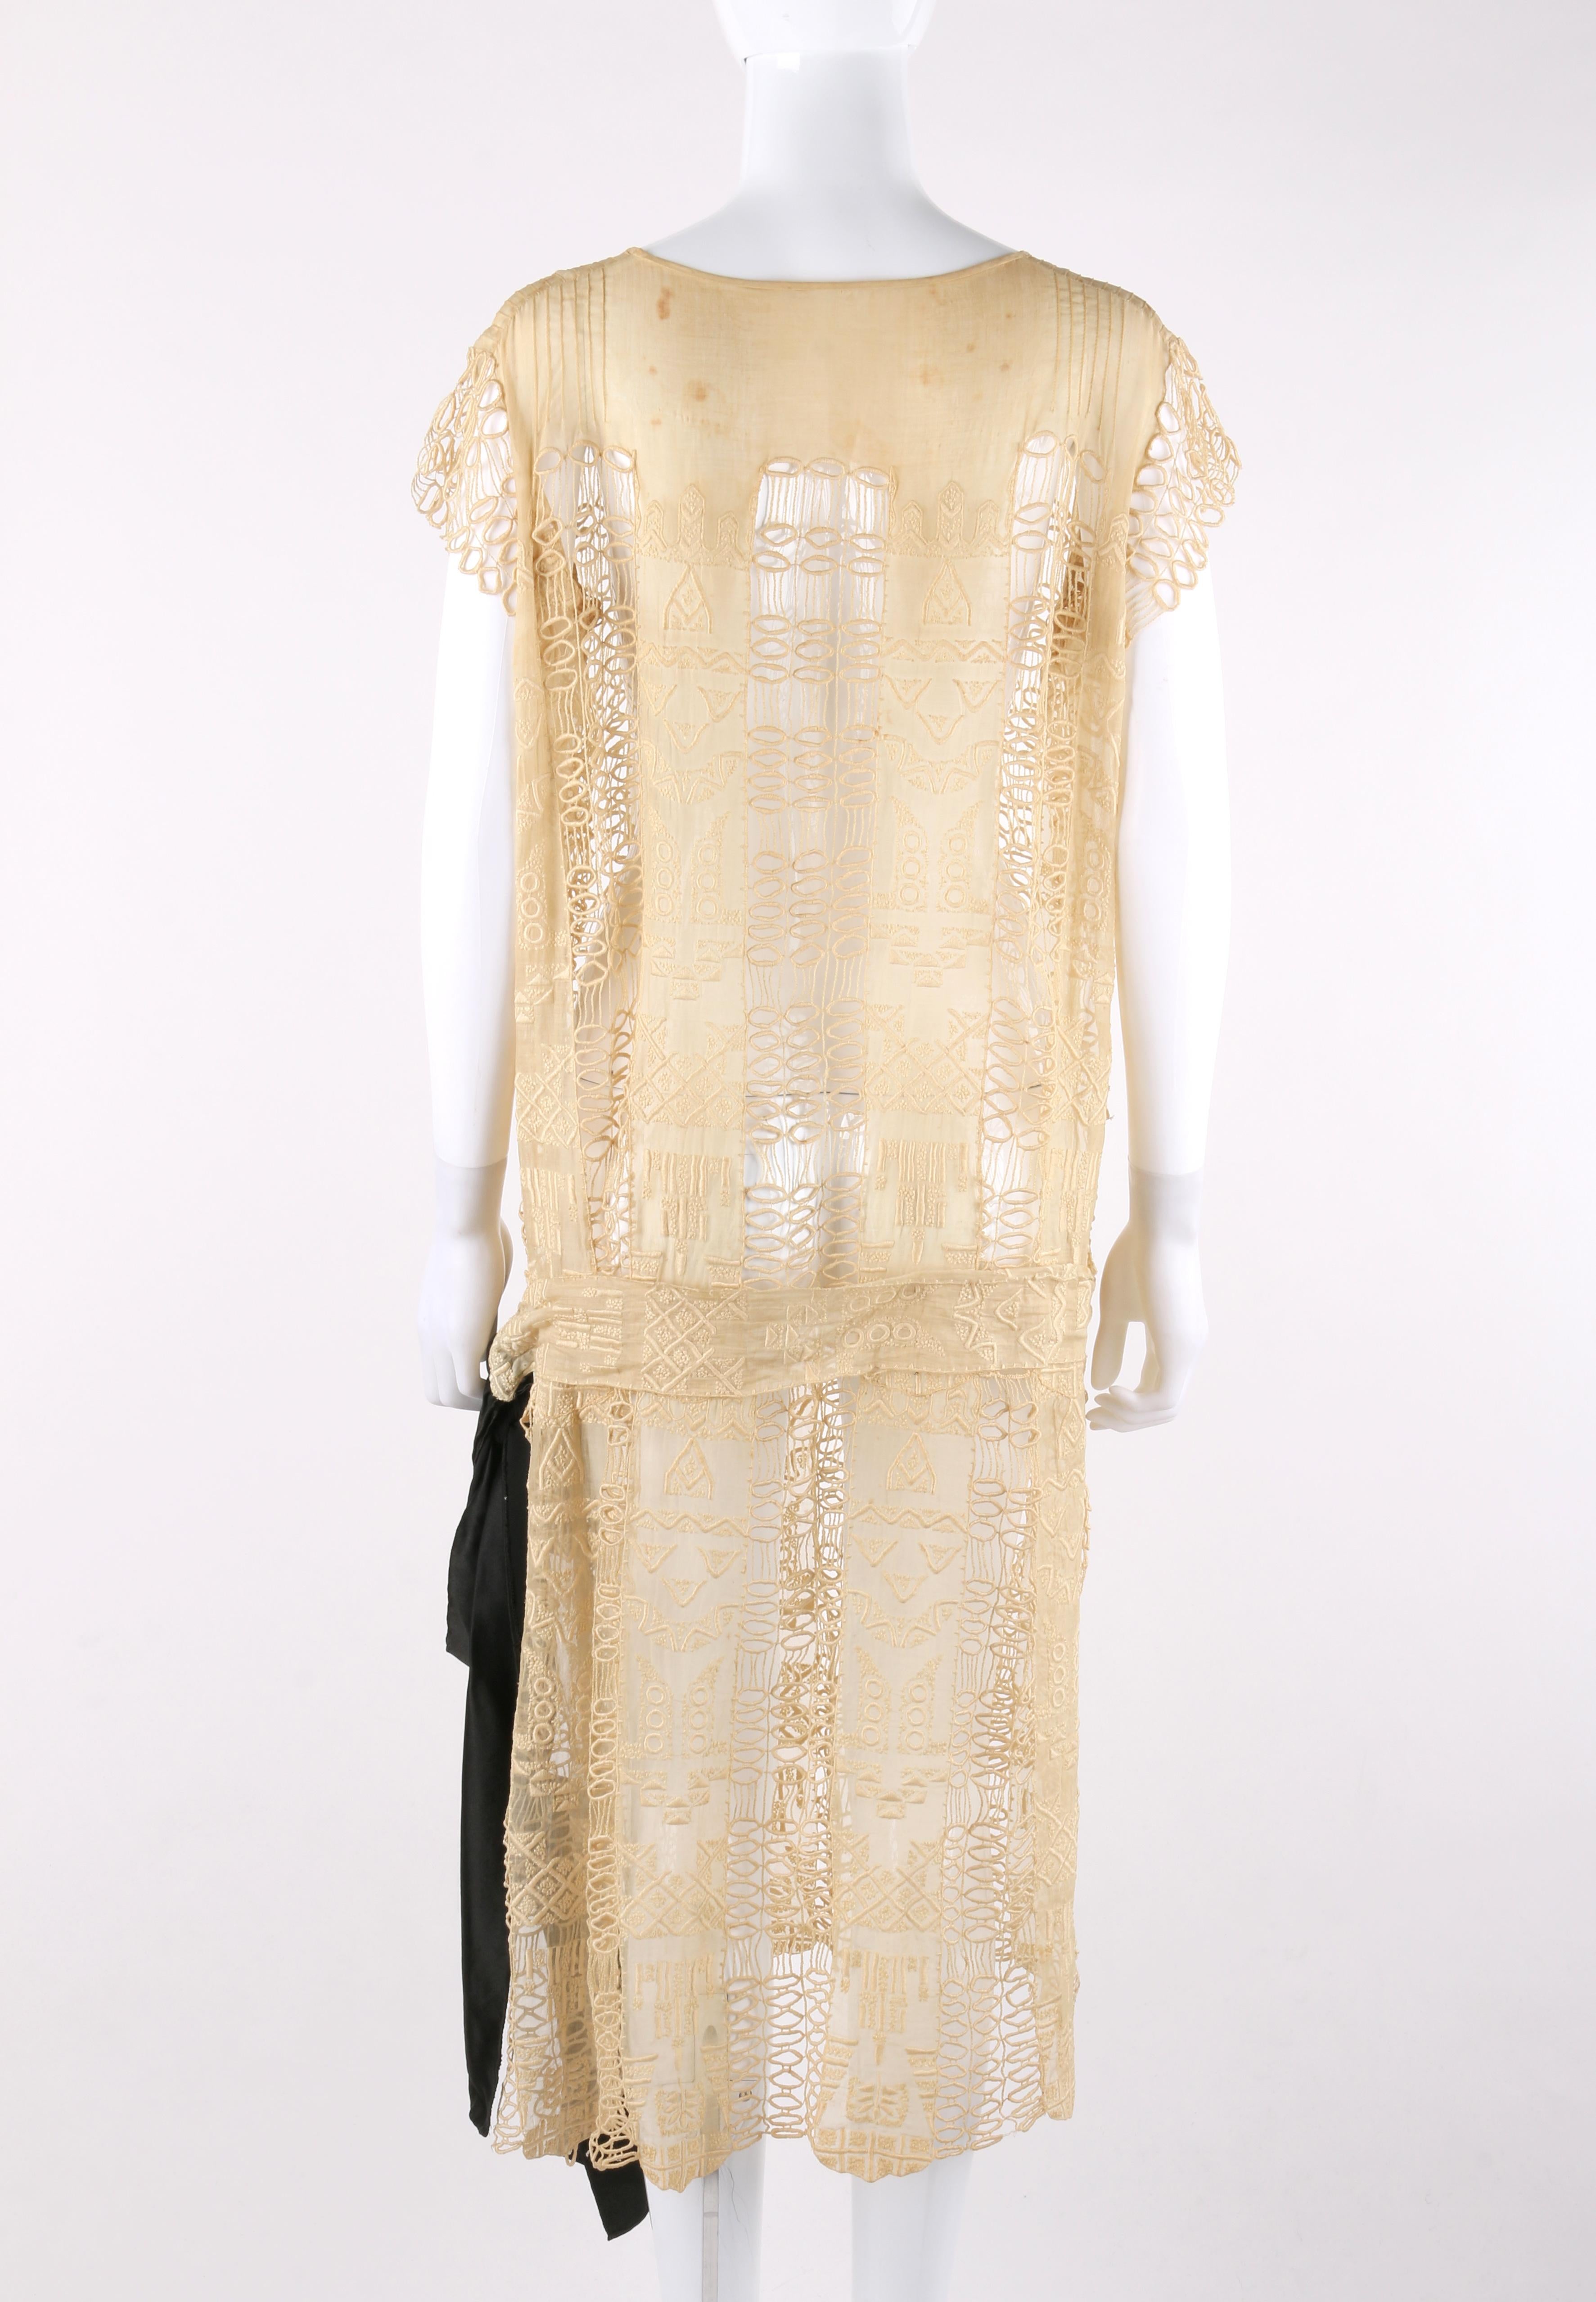 VINTAGE c.1920’s Drop Waist Belted Black Bow Ivory Lace Sheer Cotton Shift Dress

Circa: 1920’s 
Label(s): None
Style: Drop waist shift dress
Color(s): Shades of ivory and black
Lined: No 
Unmarked Fabric Content (feel of): Cotton
Additional Details